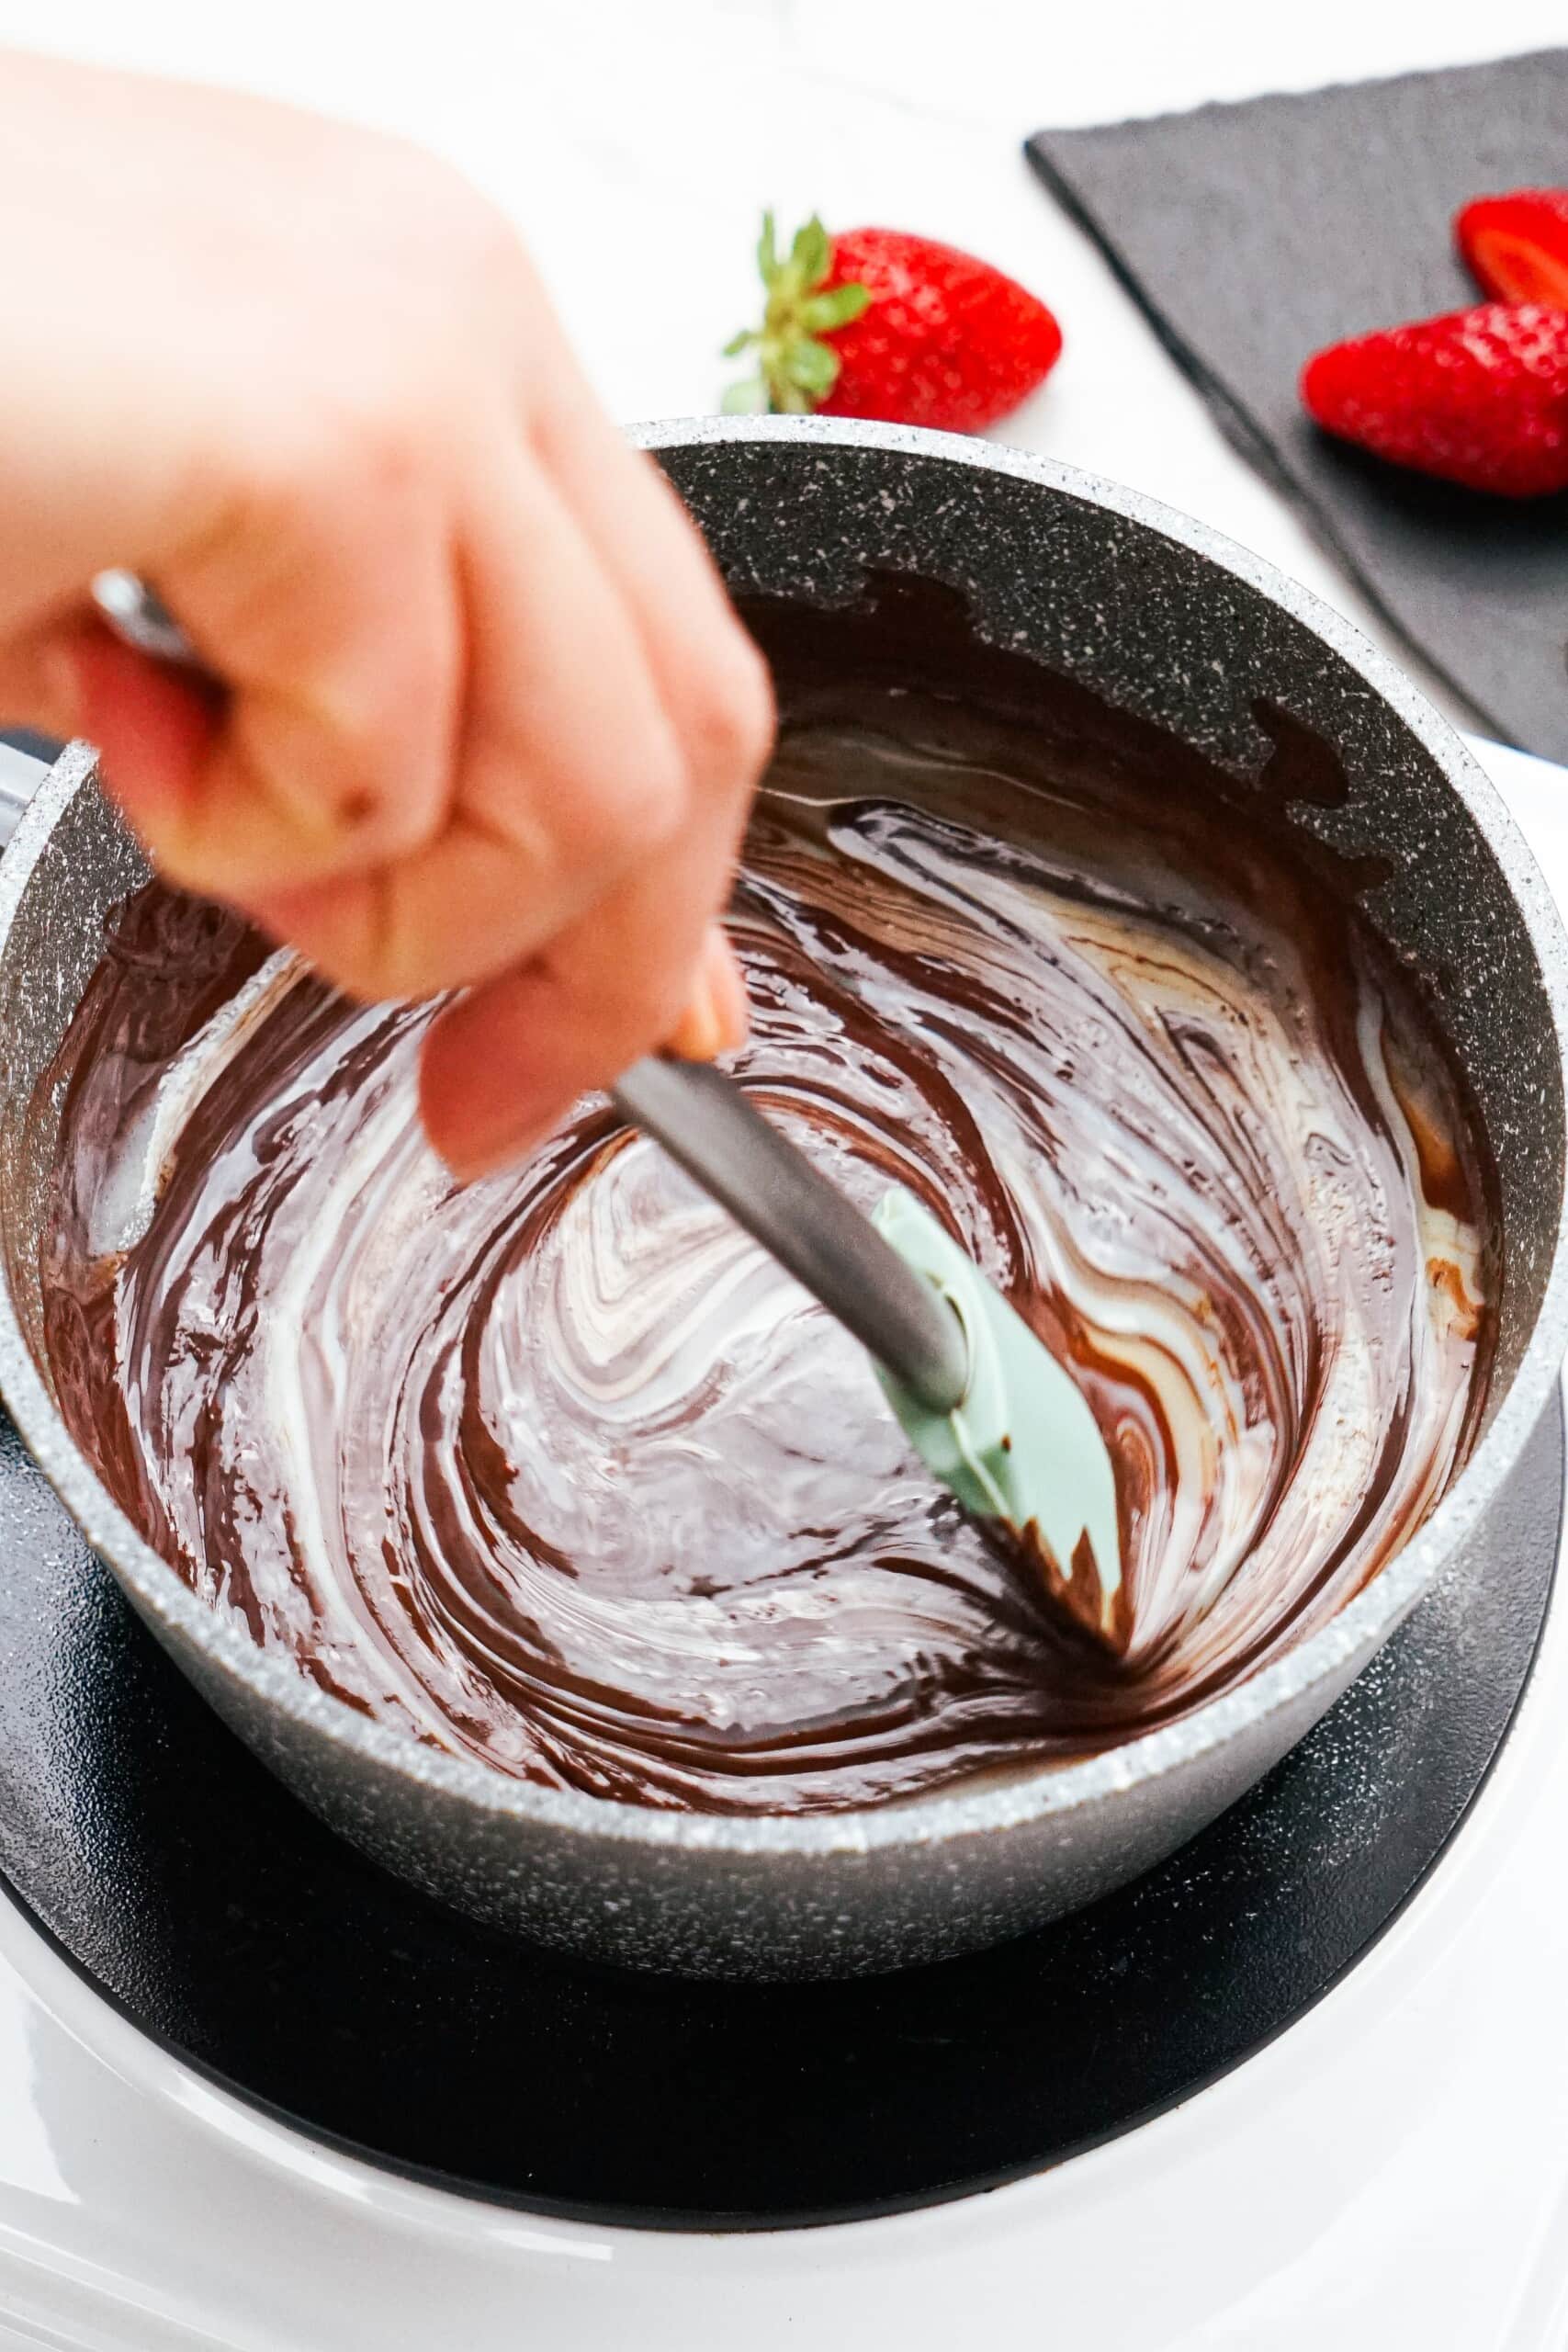 woman's hand stirring dipping chocolate ingredients in sauce pot.